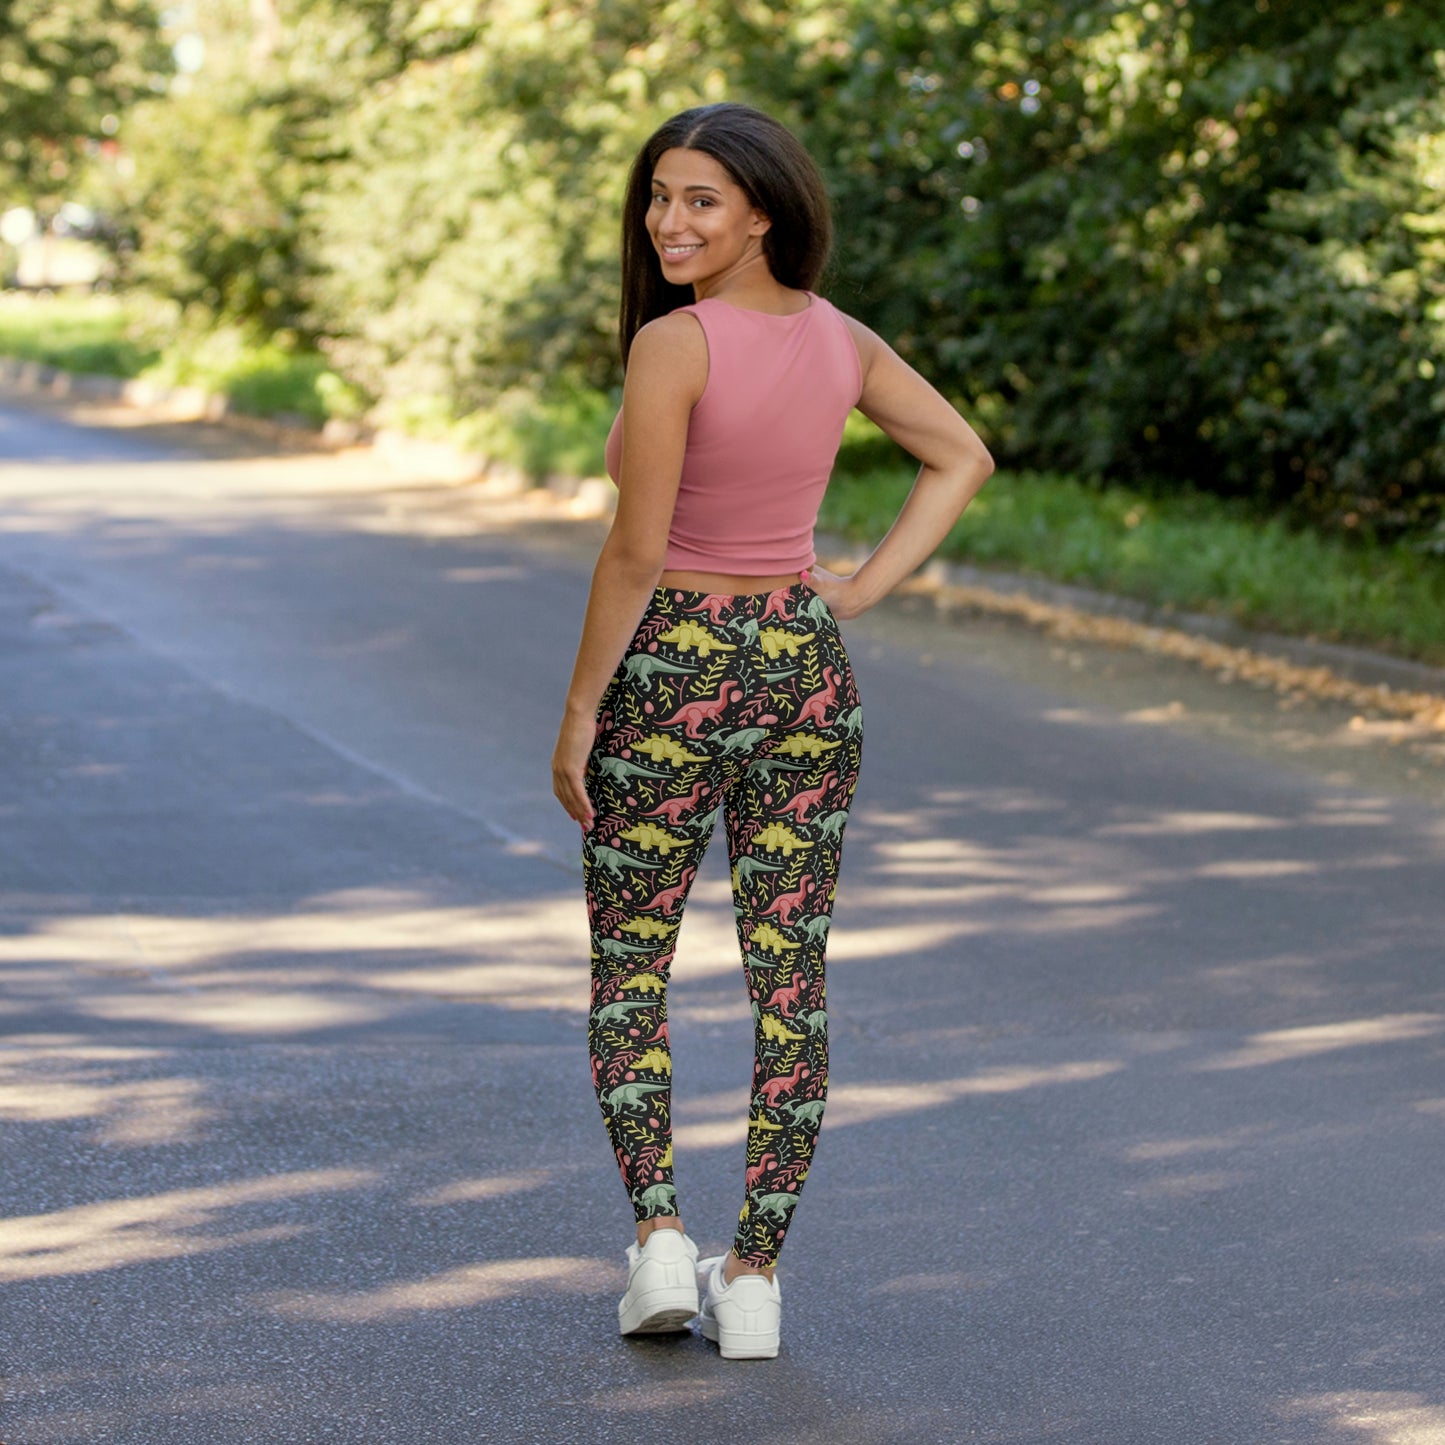 Women Dinosaur Trex Jurassic Park Leggings, One of a Kind Gift - Unique Workout Activewear tights for Wife, Best Friend . Mothers Day or Christmas Gift